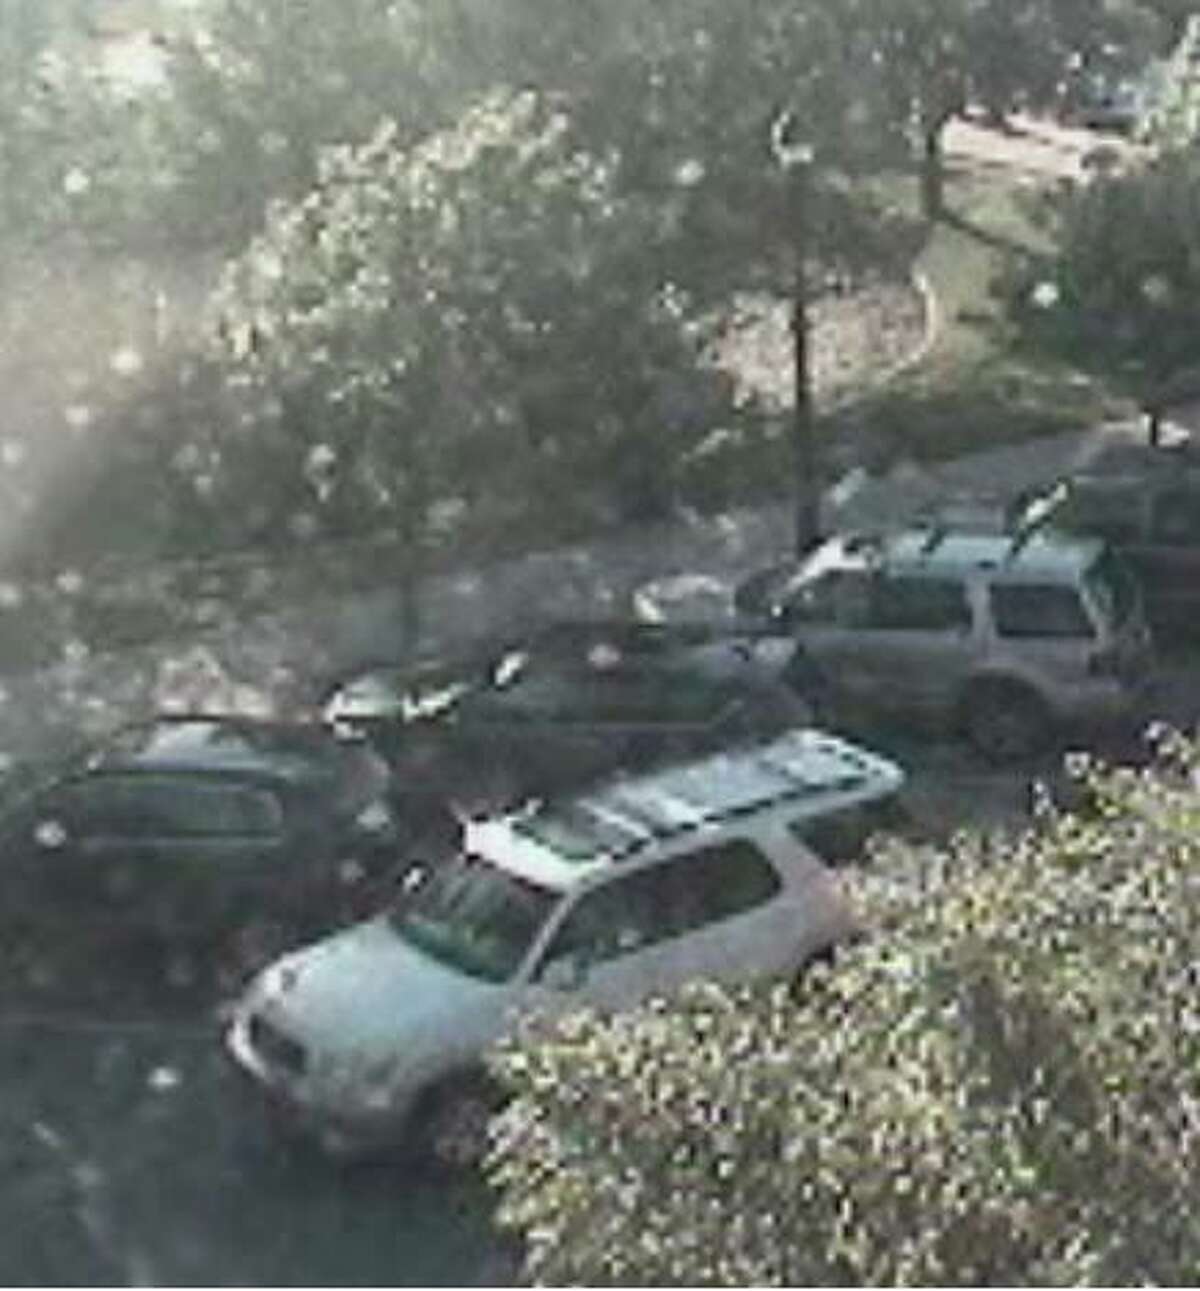 Surveillance footage provided by the Southlake Police Department shows a white SUV purportedly driven by suspects who carried out the killing of Juan Jesus Guerrero Chapa — a former lawyer for Osiel Cárdenas Guillén, leader of the Gulf Cartel and Los Zetas — in May 2013 while he and his wife were out shopping in Southlake.